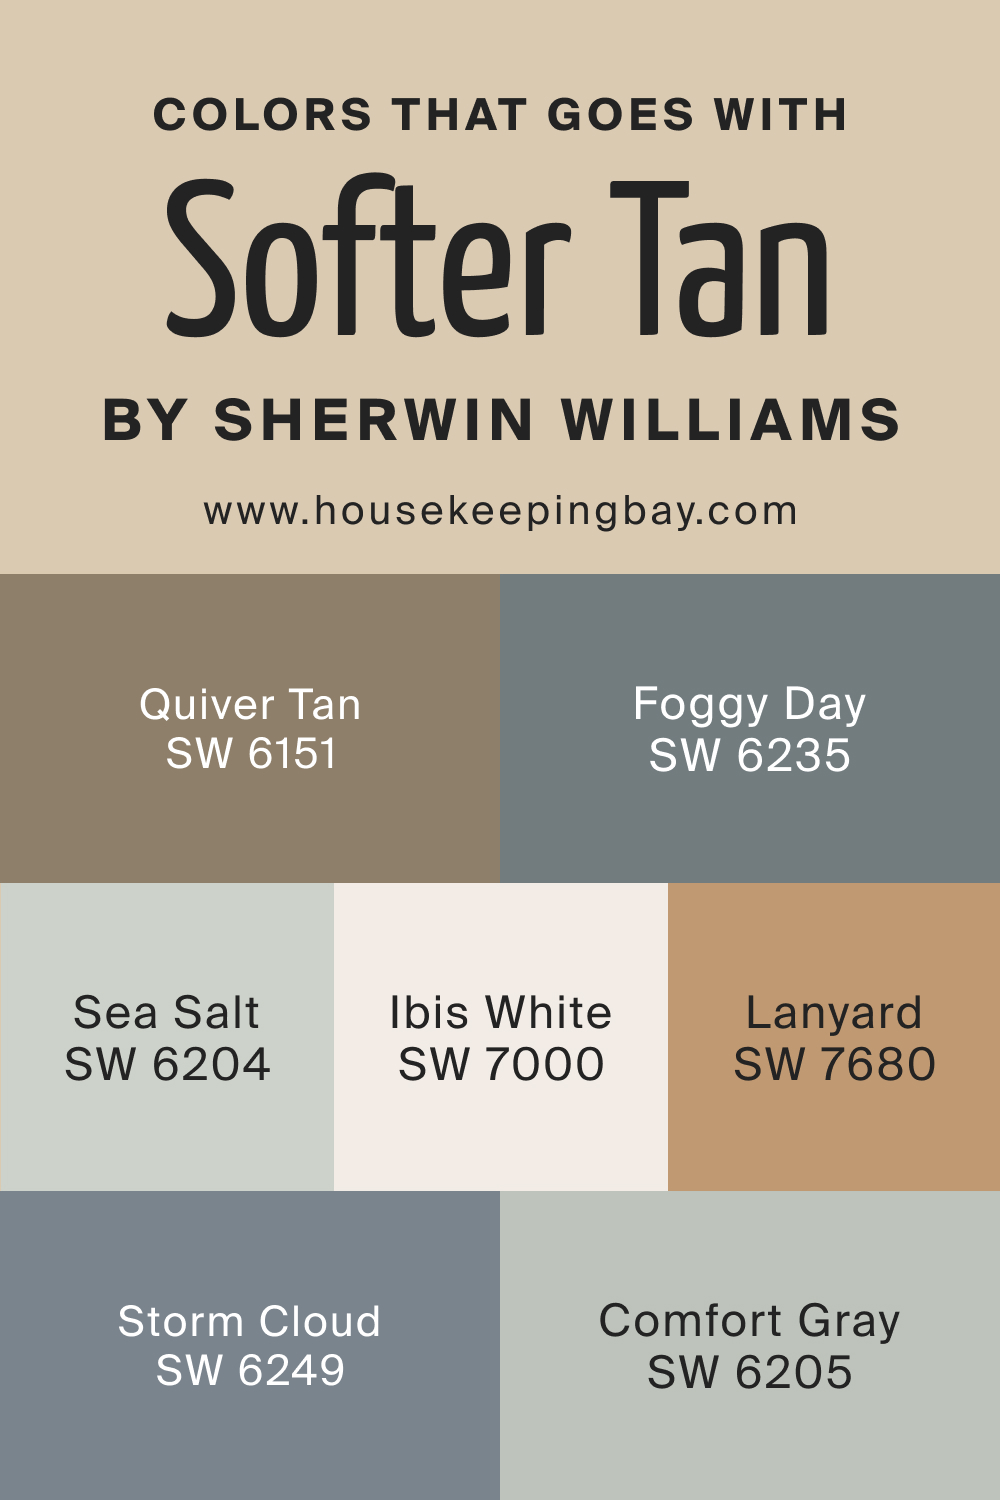 Colors that goes with SW Softer Tan by Sherwin Williams